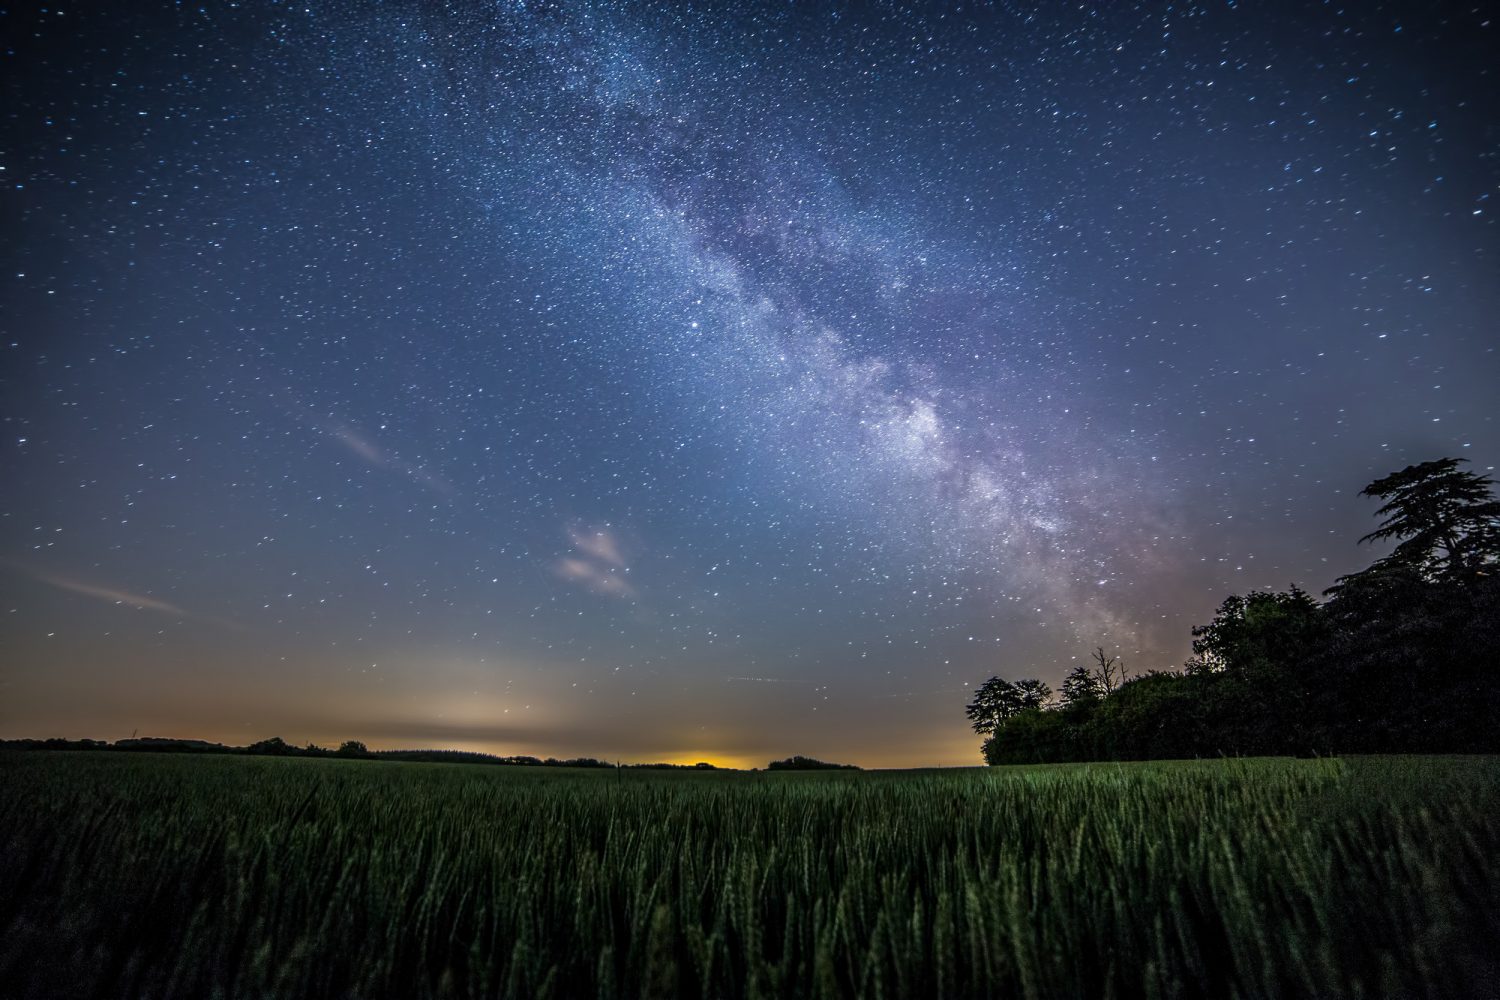 The Milky Way stars over the South Downs National Park